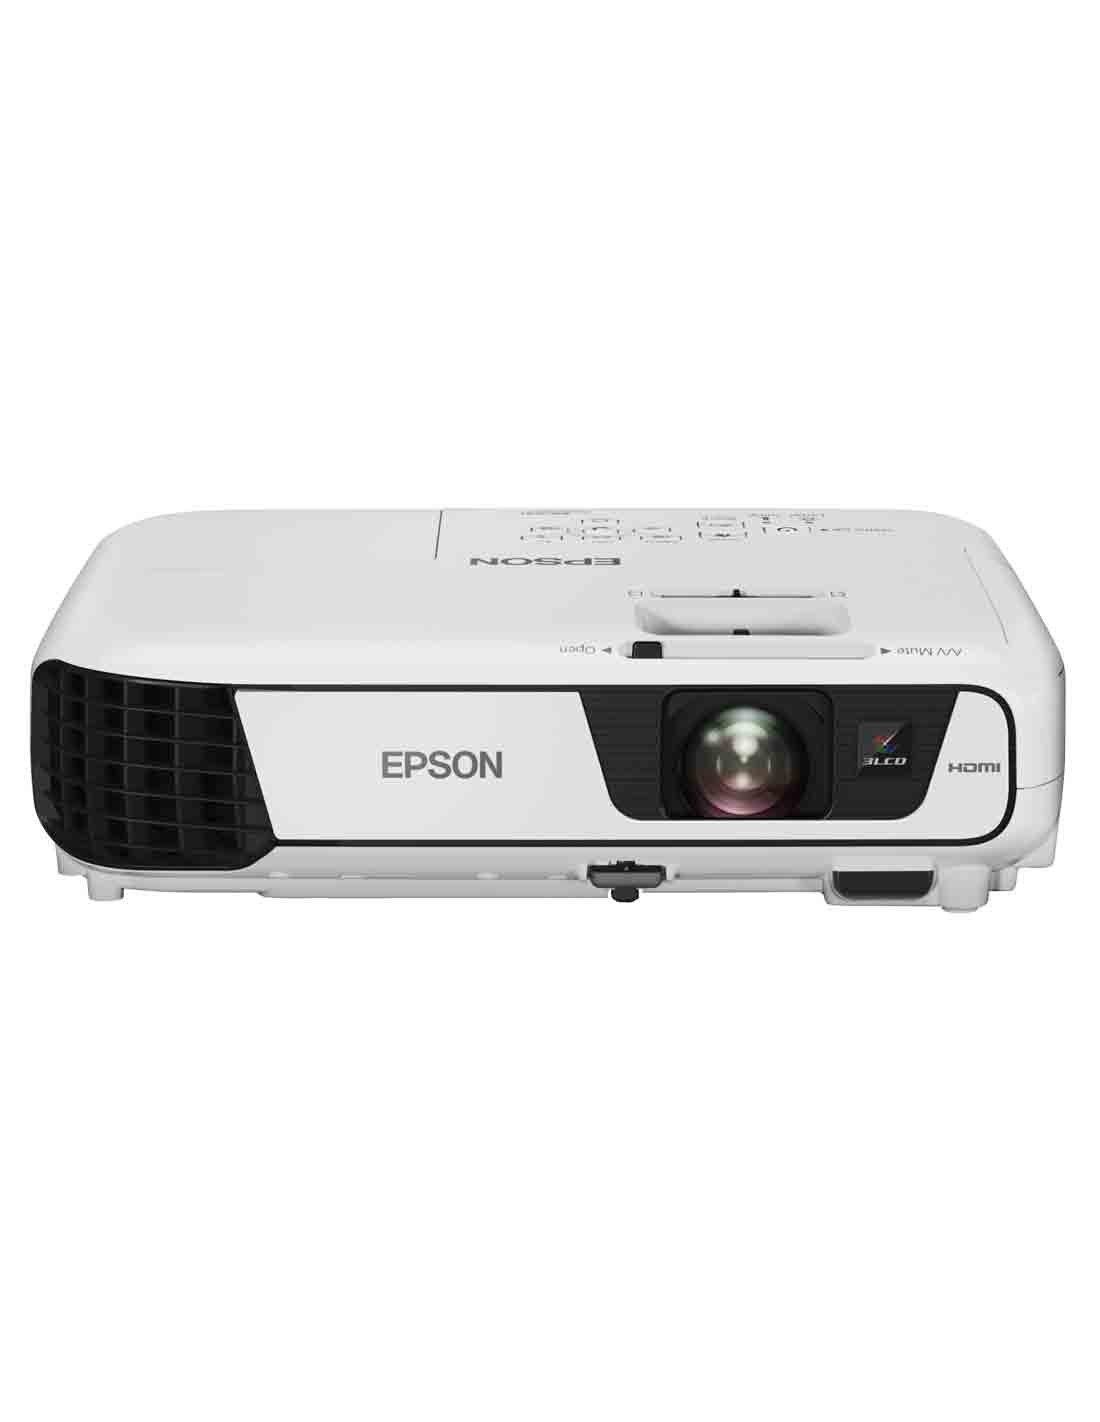 Epson EB-X31 Projector at a Cheap Price and Free Delivery in Dubai